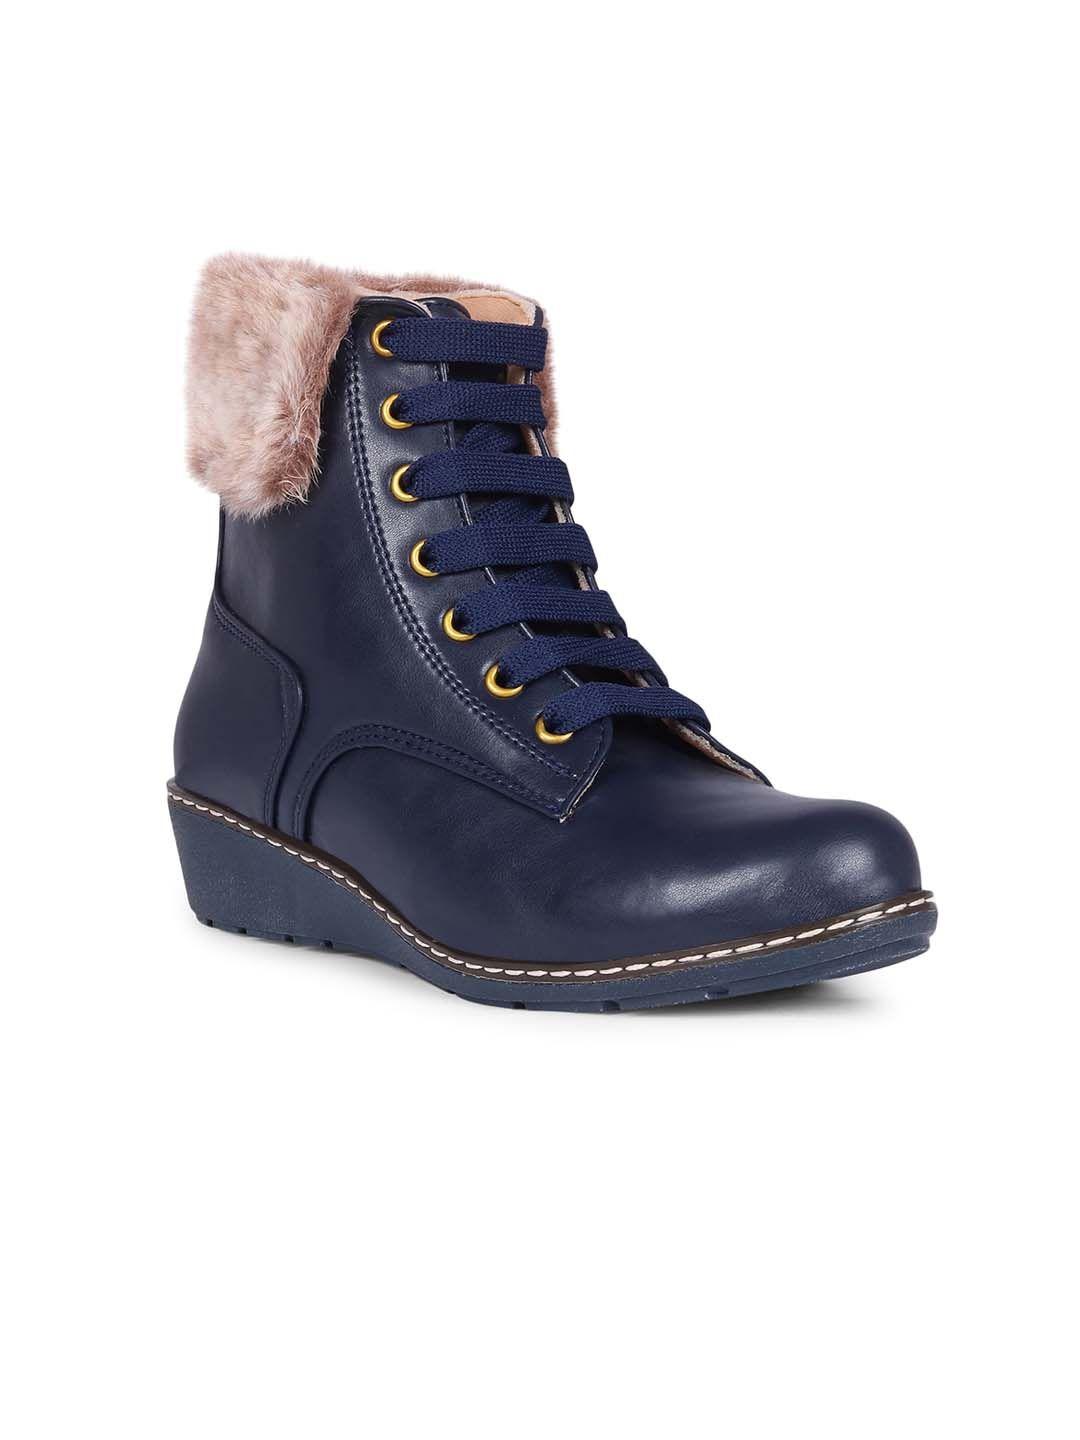 the roadster lifestyle co. women navy blue mid top wedge faux fur trim regular boots